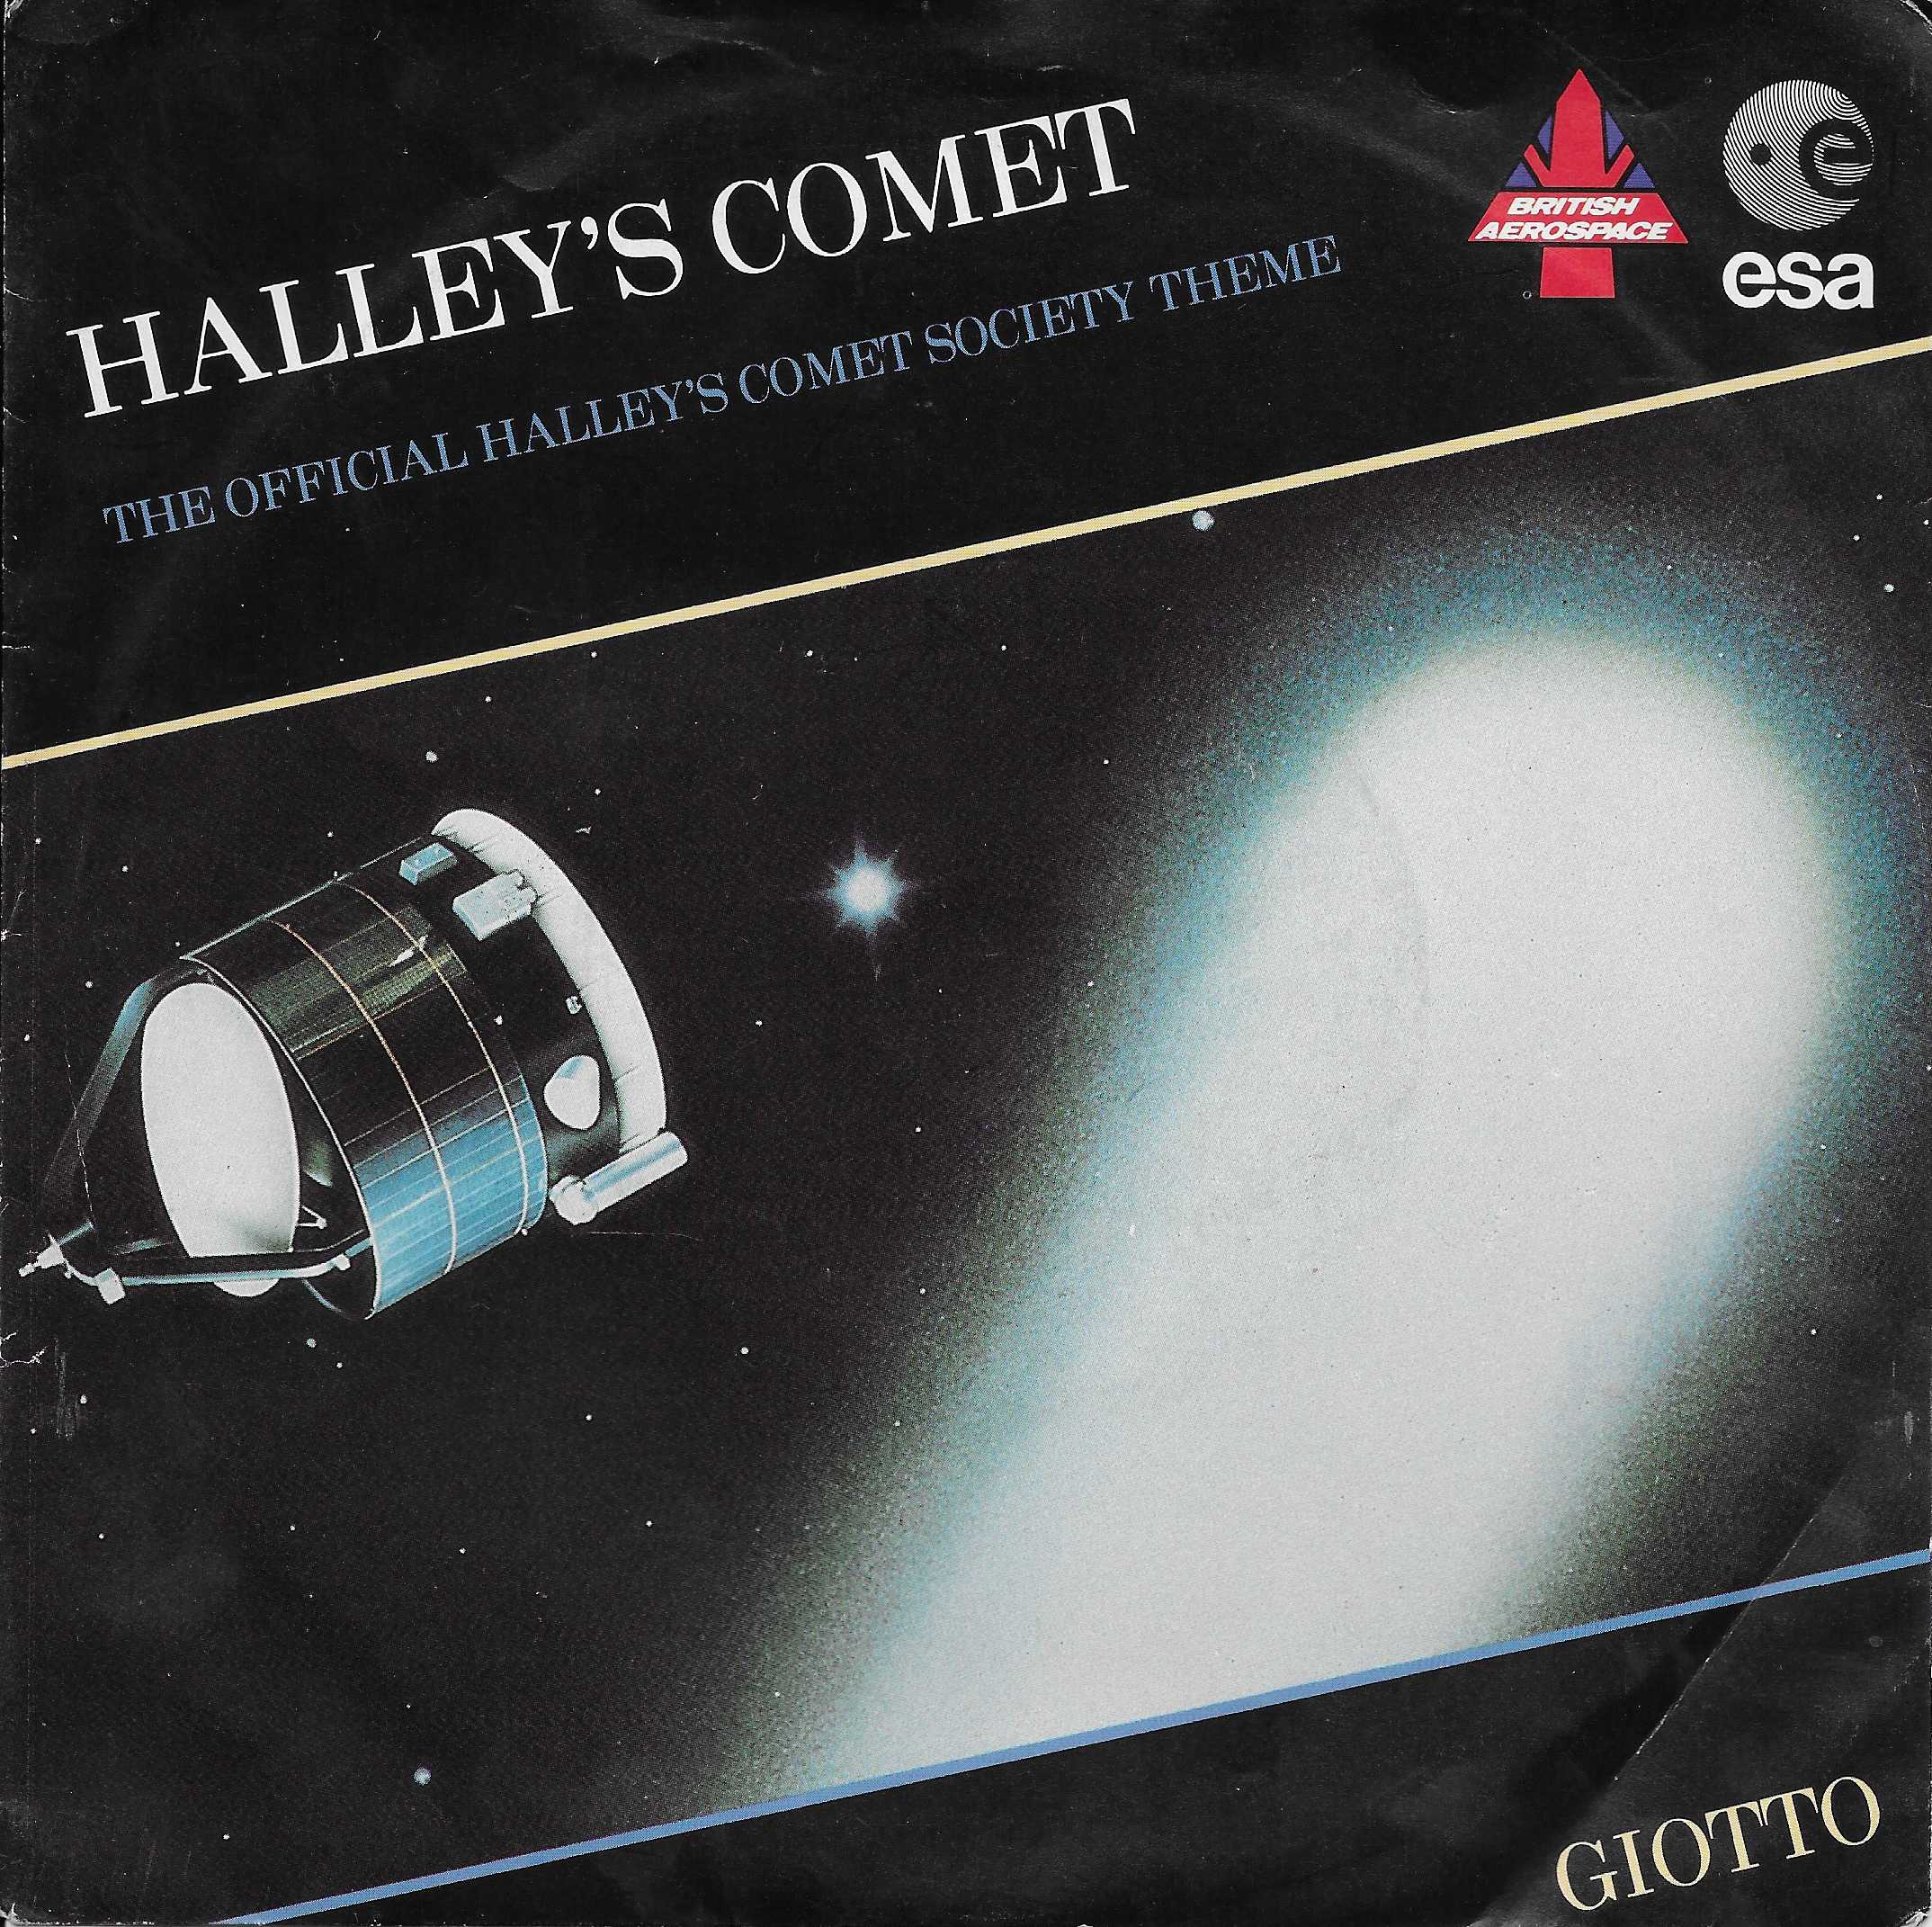 Picture of Halley's Comet by artist Paul Hart / Joe Campbell from the BBC singles - Records and Tapes library